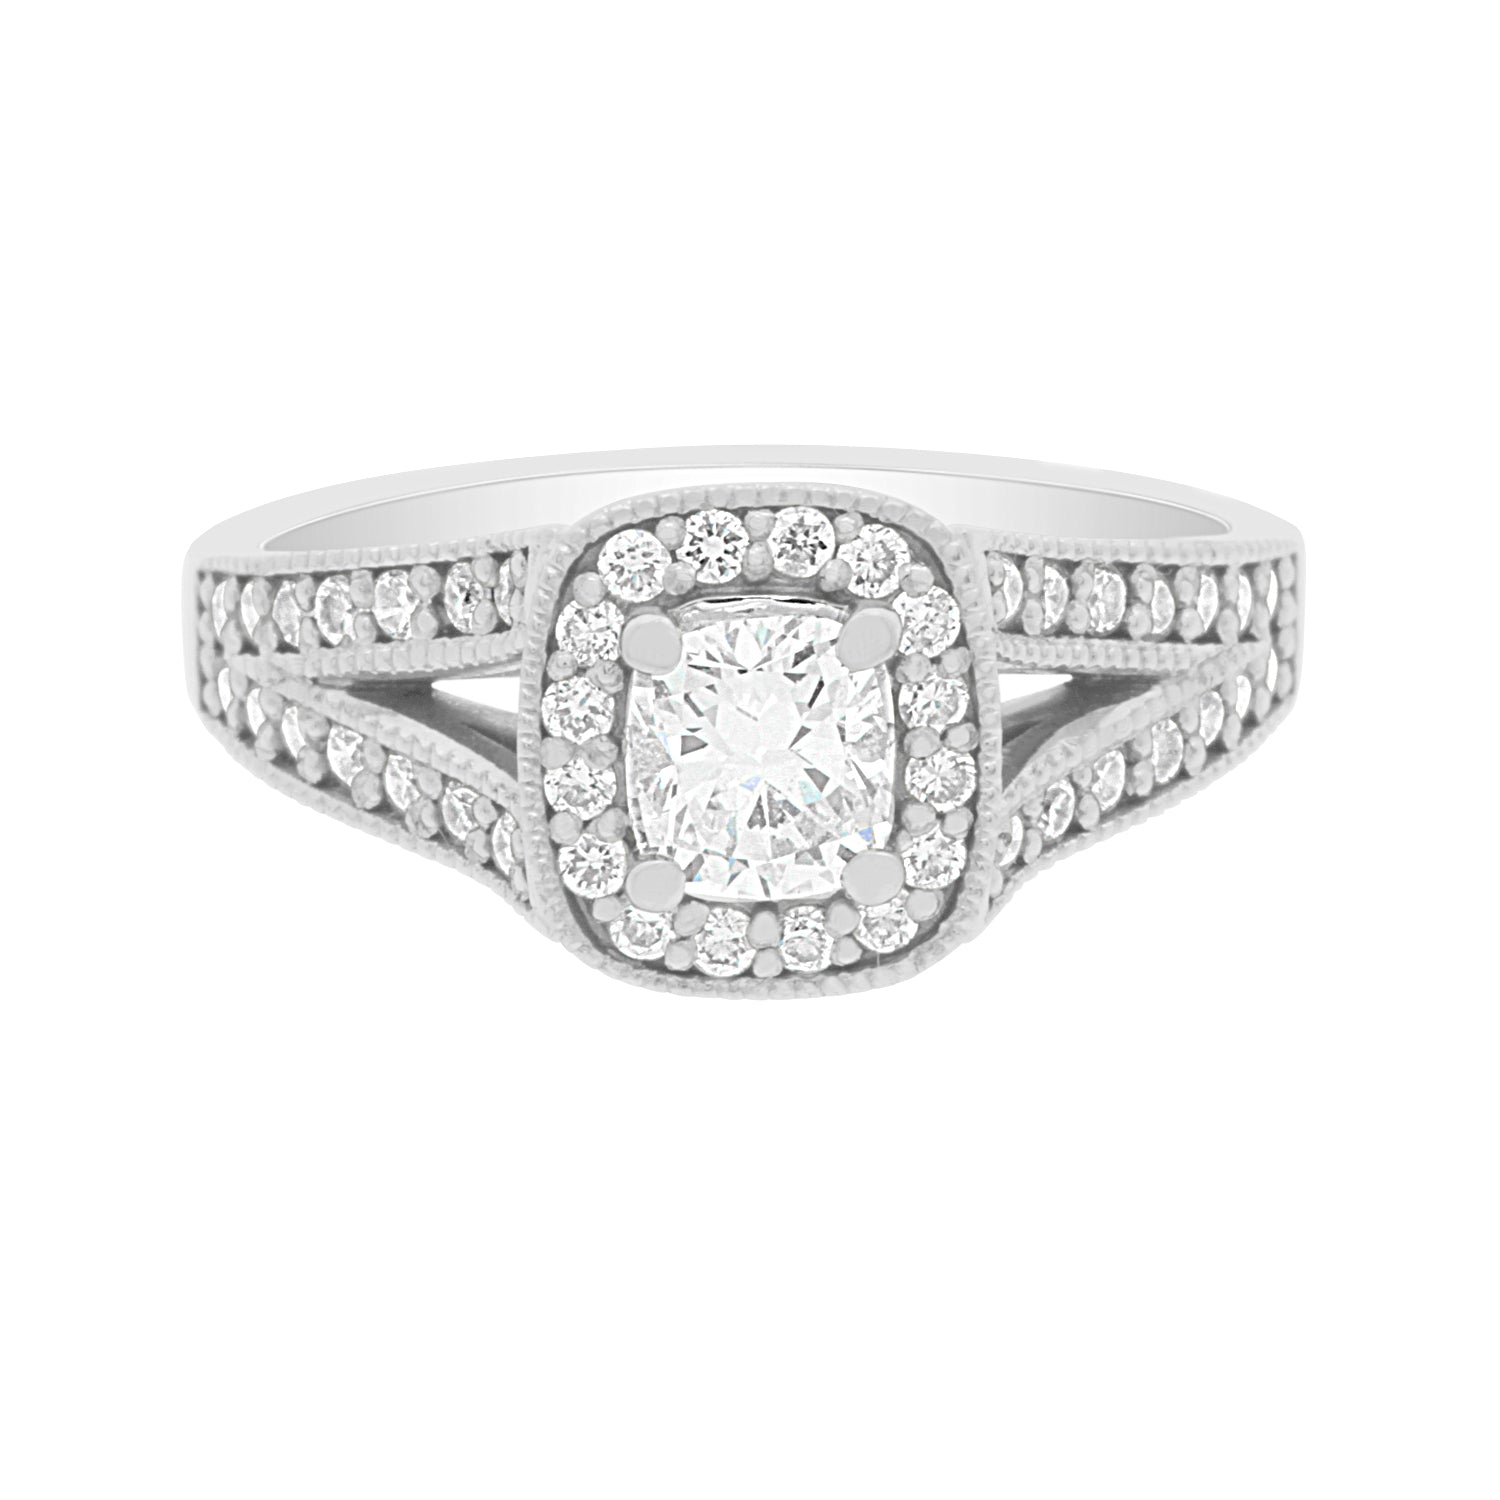 Cushion Halo Diamond Ring in white gold on a white surface